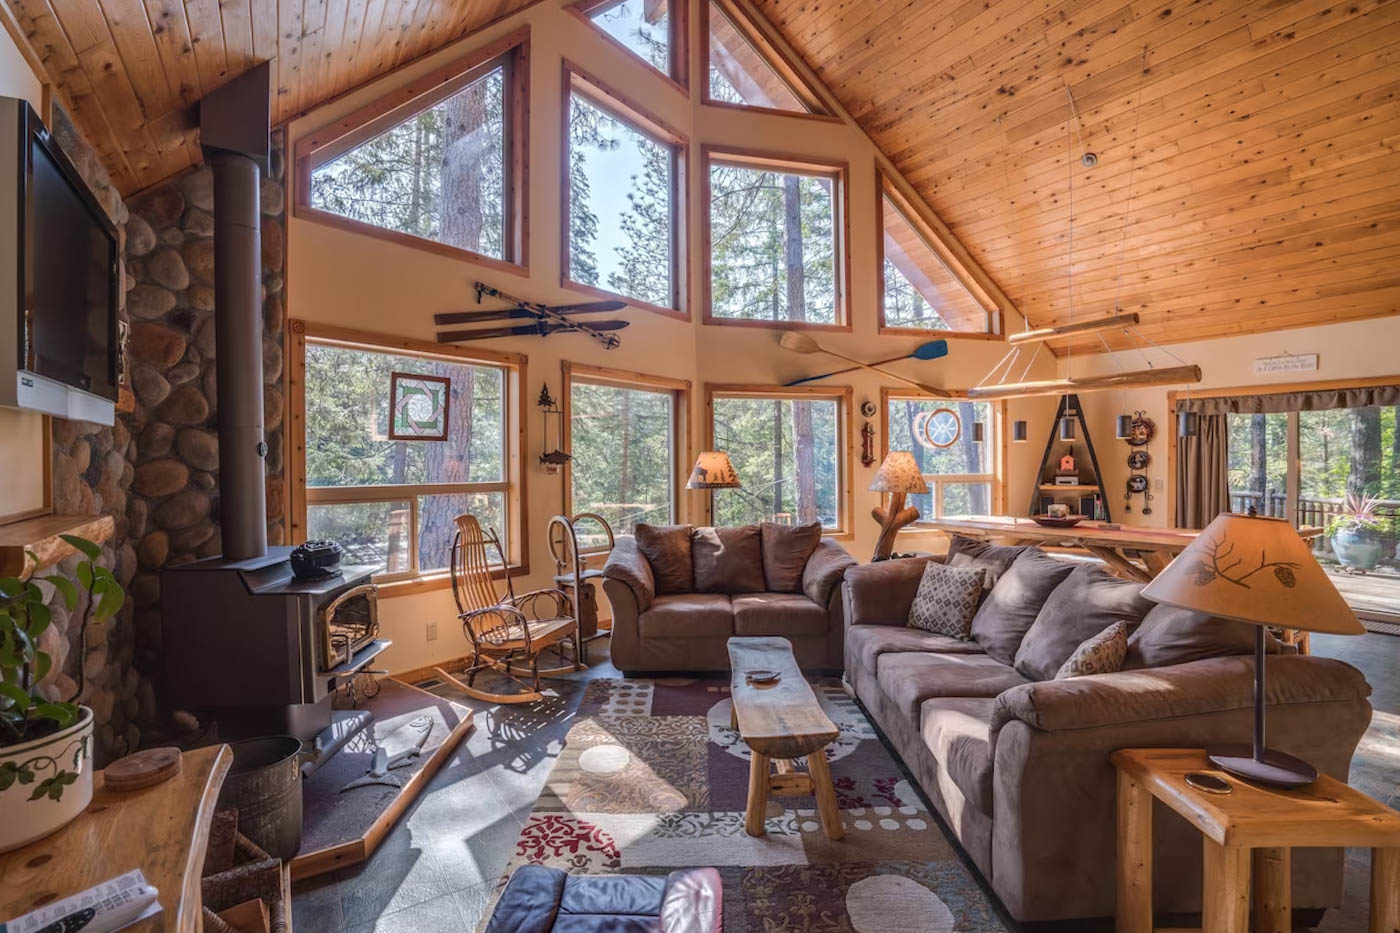 Two comfy looking sofas and a wood burner and chimney inside the living area of a wooden cabin with giant windows looking into the forest.